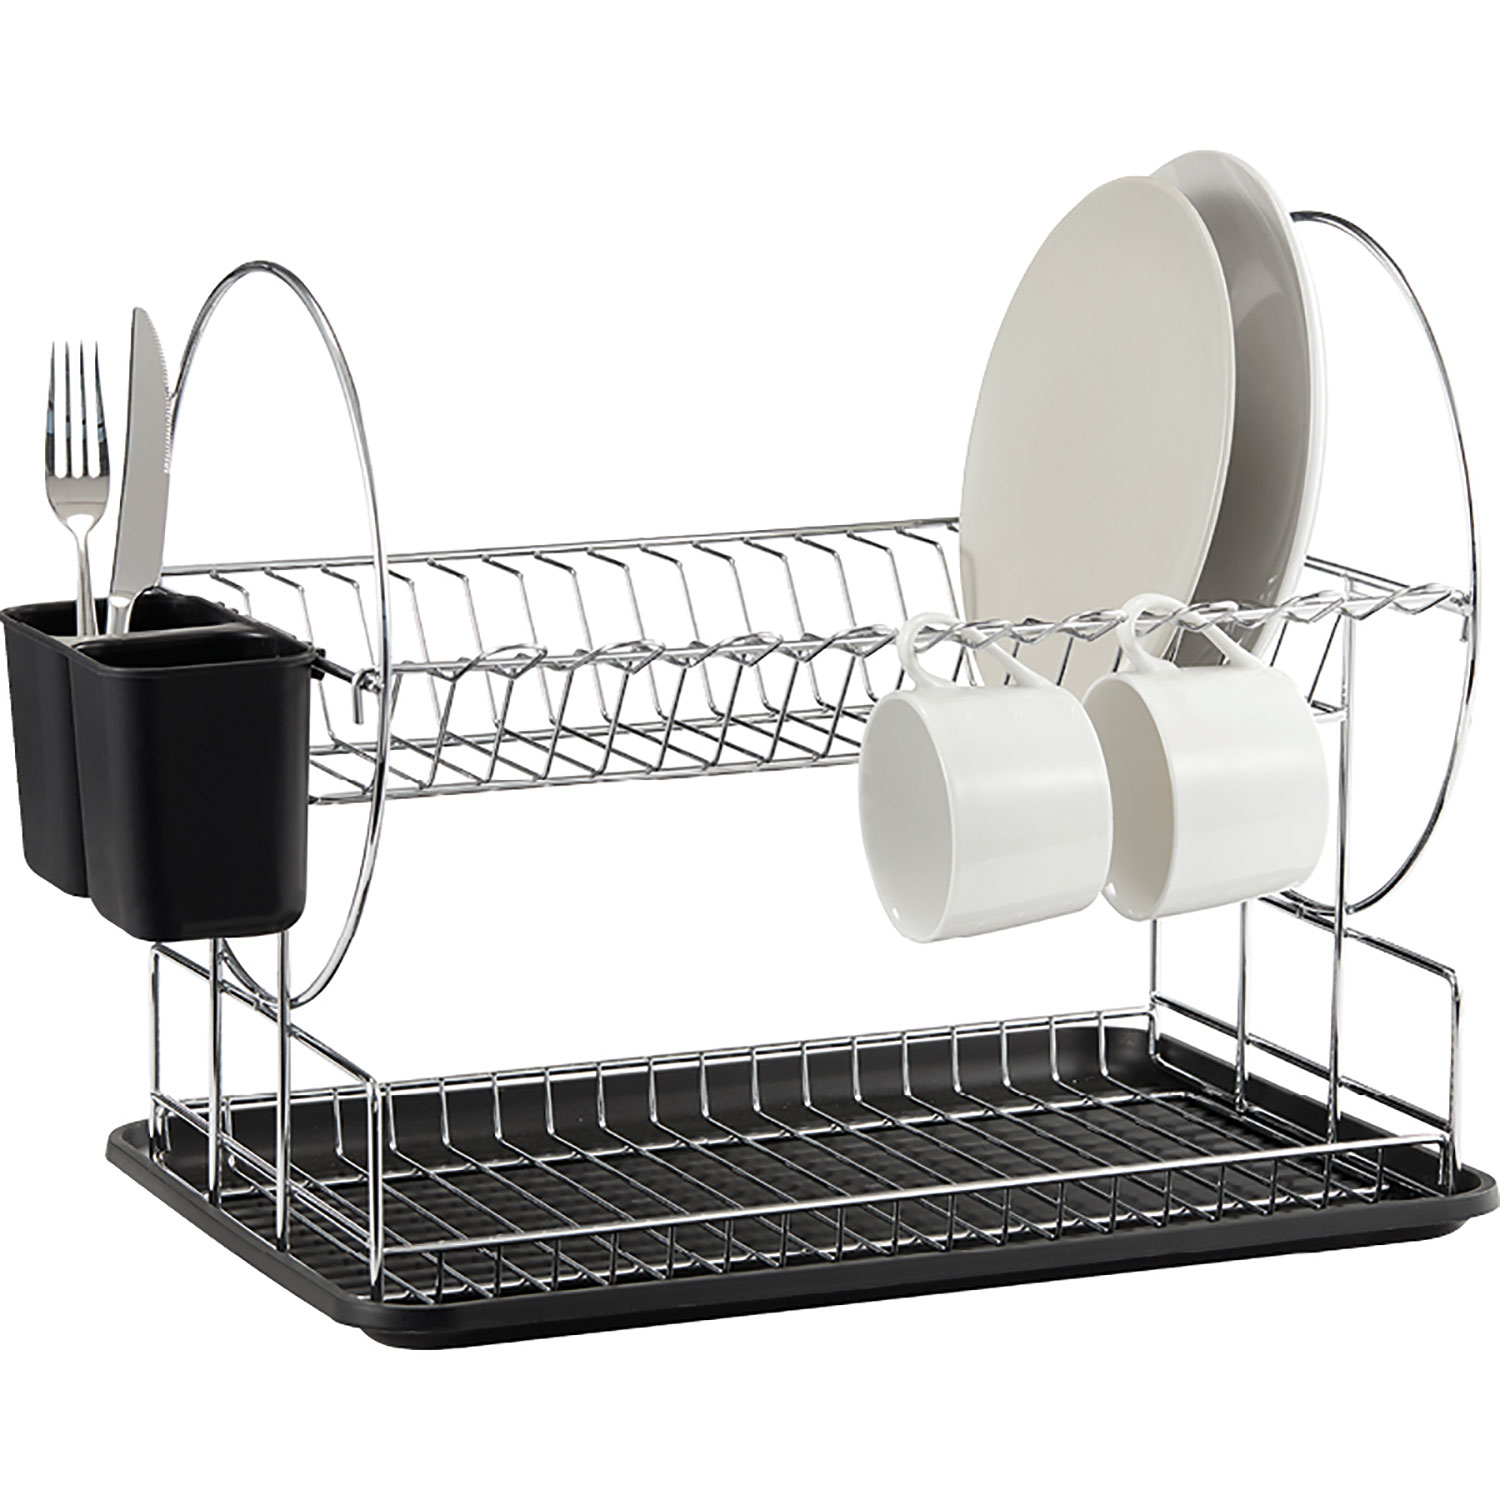 2 Tier Chrome Dish Drainer and Cutlery Holder